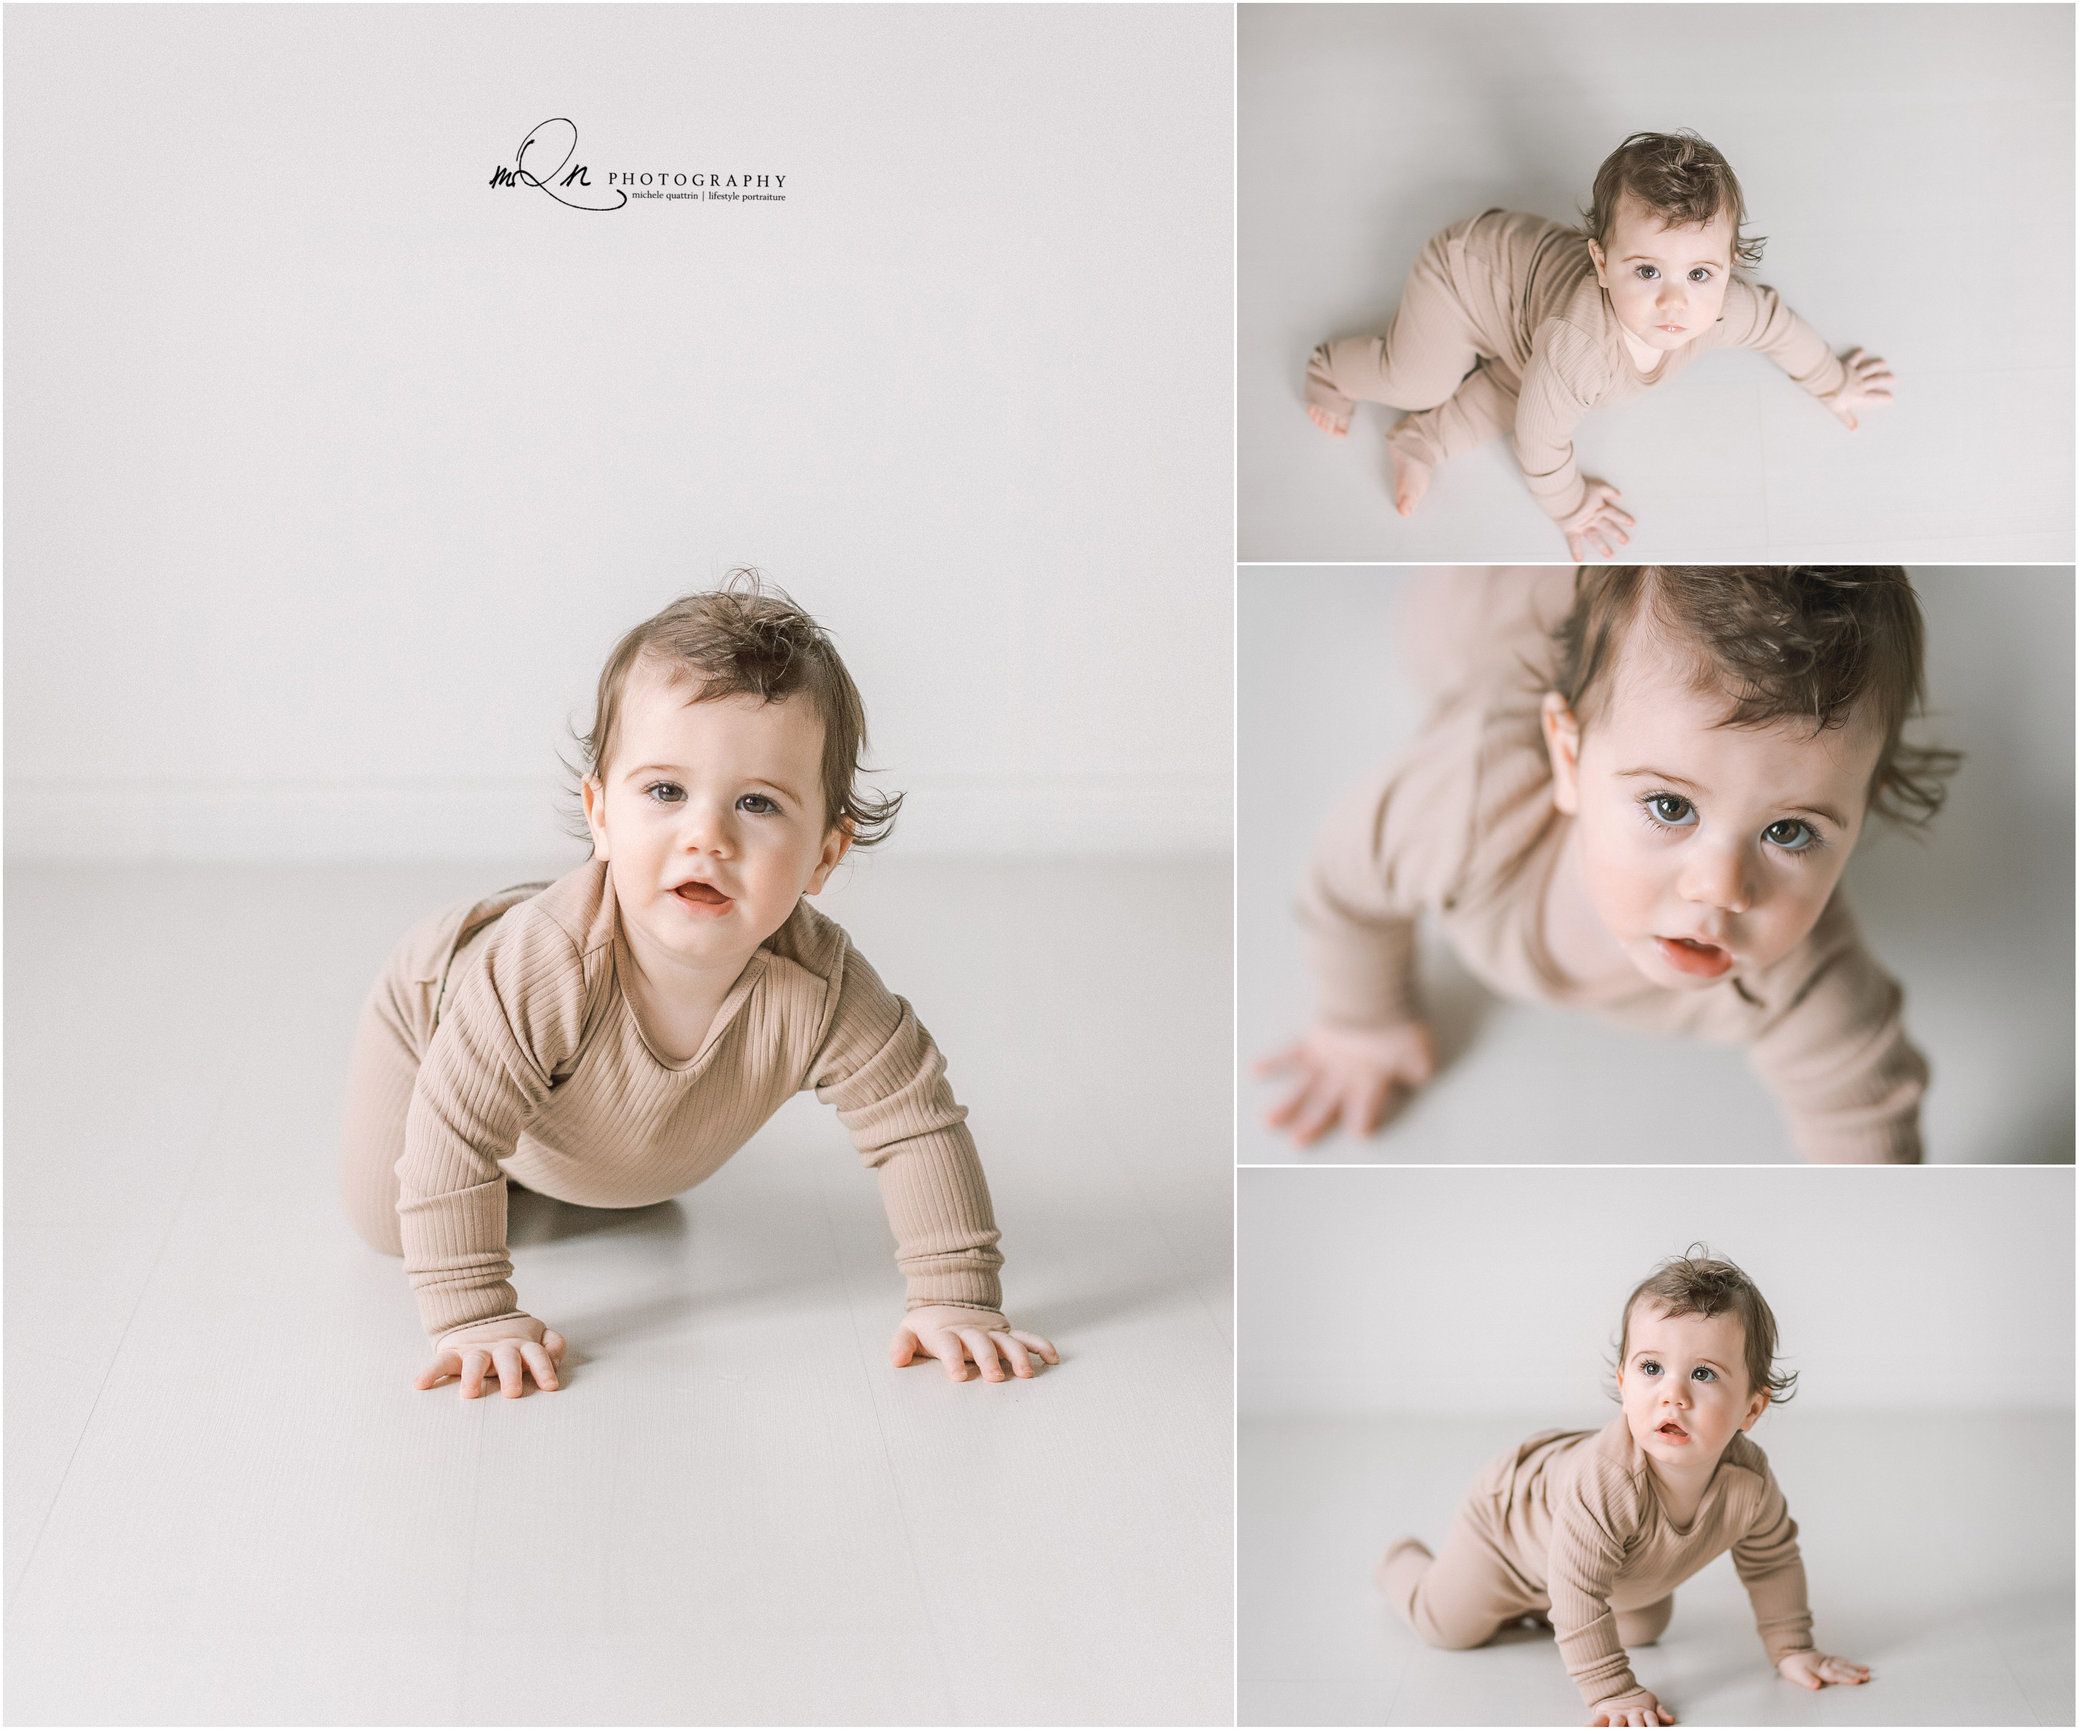 Pose ideas for mom + baby 🤩🤎 | Gallery posted by Lauren Ashby | Lemon8